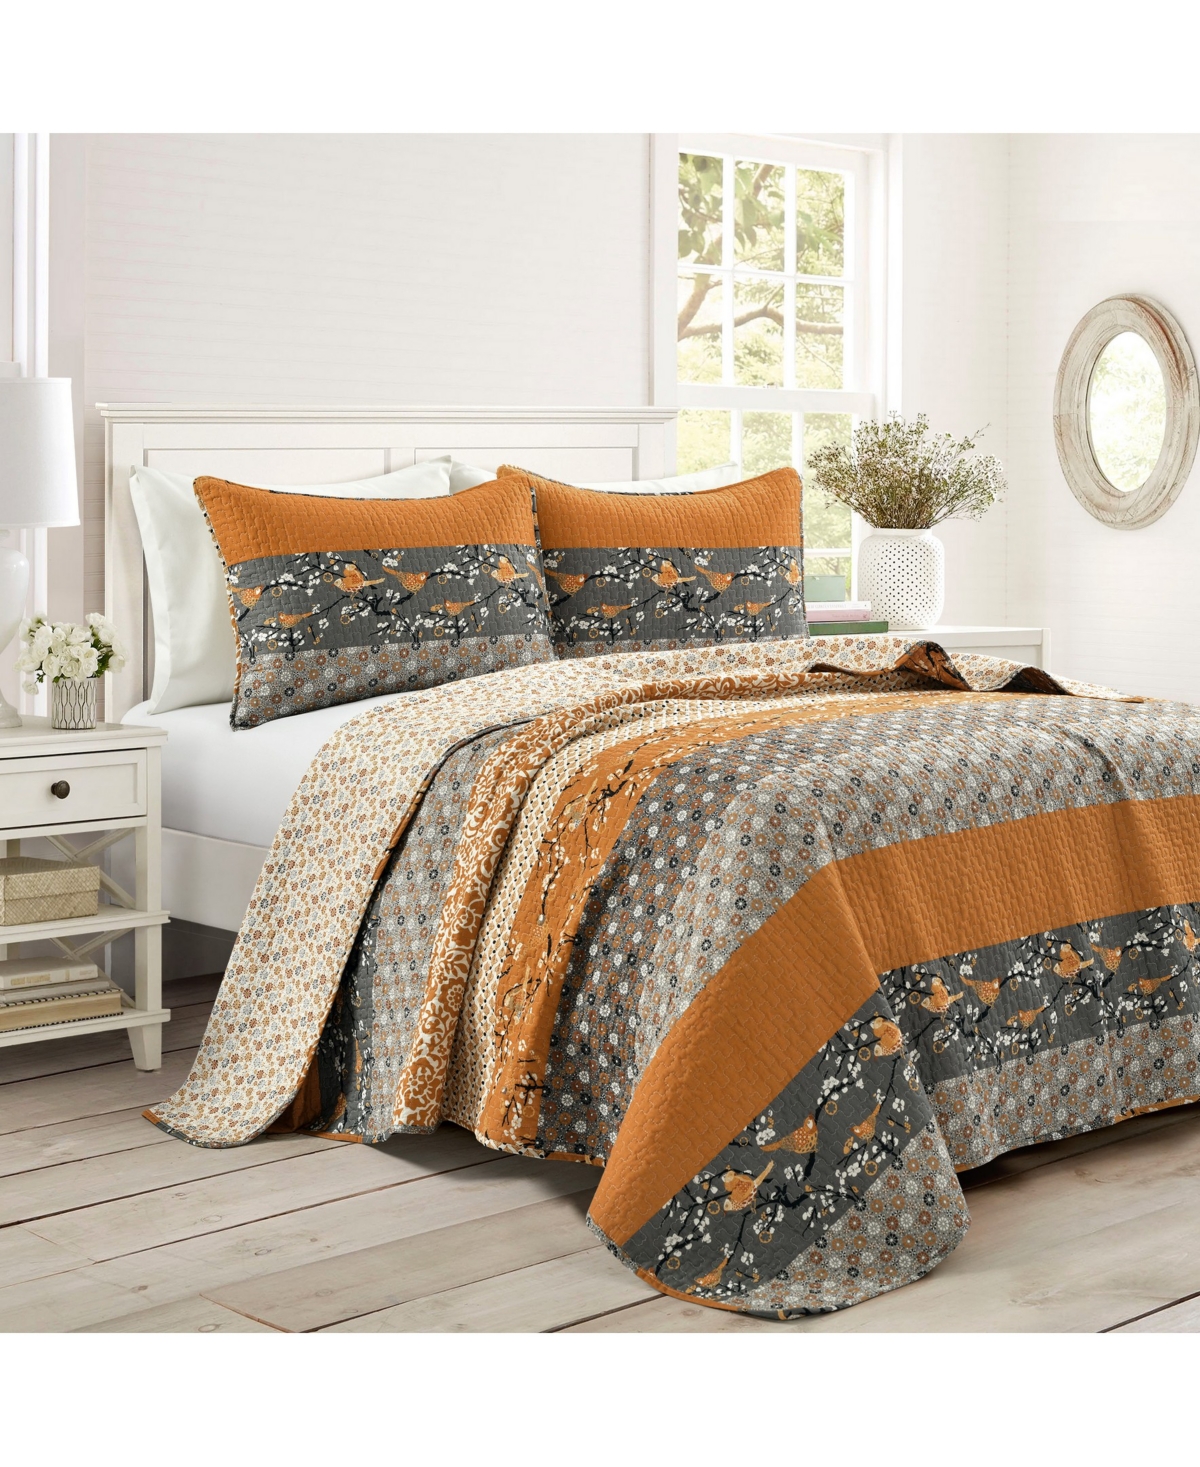 Lush Decor Royal Empire 3 Reversible Piece Quilt Set, Full/queen In Yellow,gray